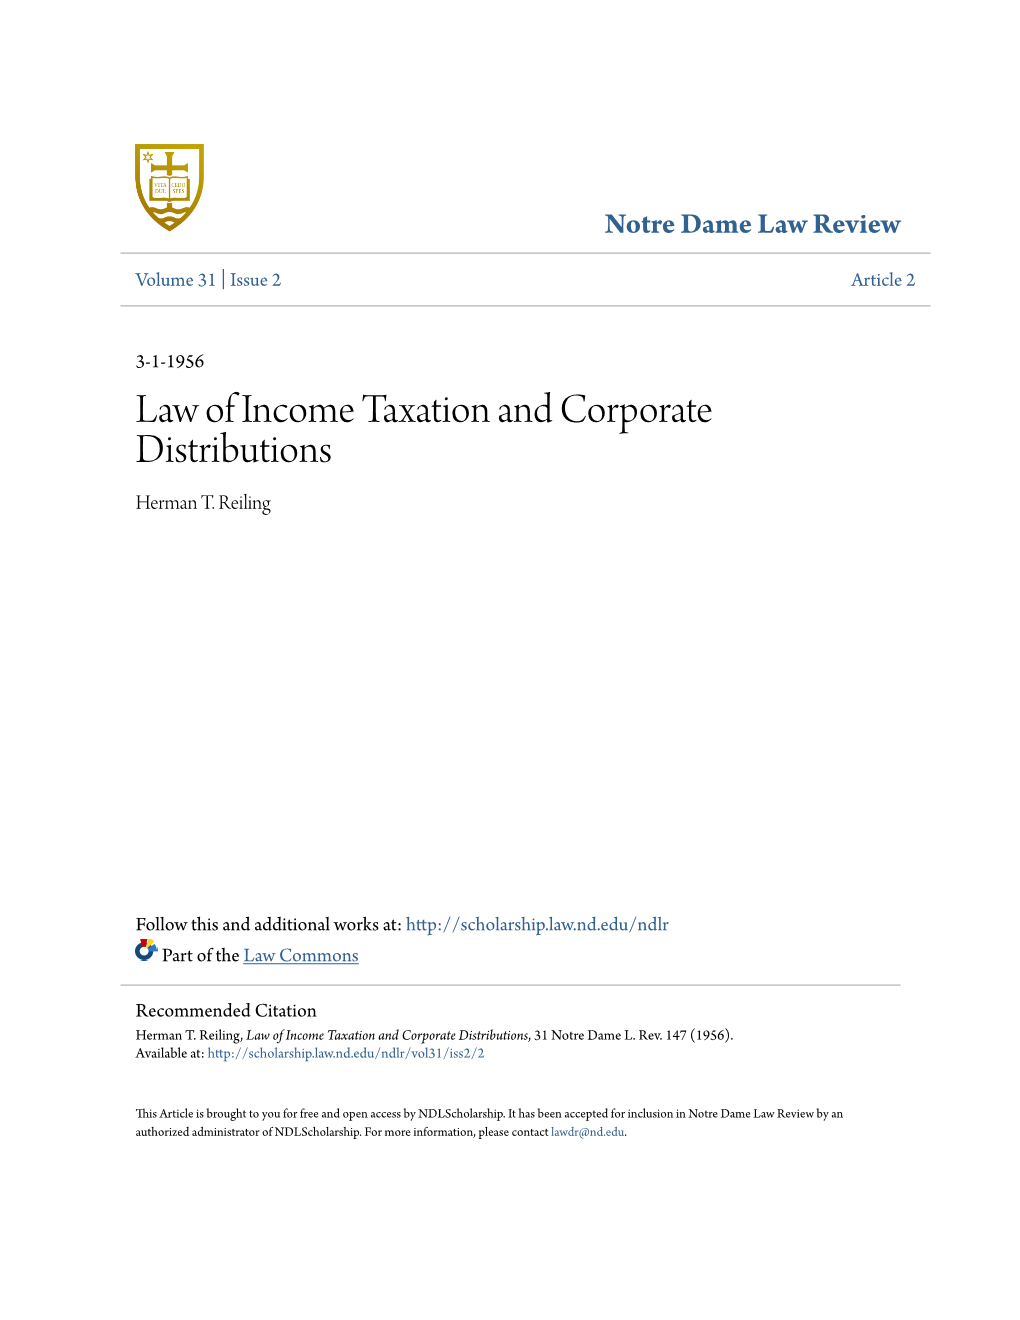 Law of Income Taxation and Corporate Distributions Herman T